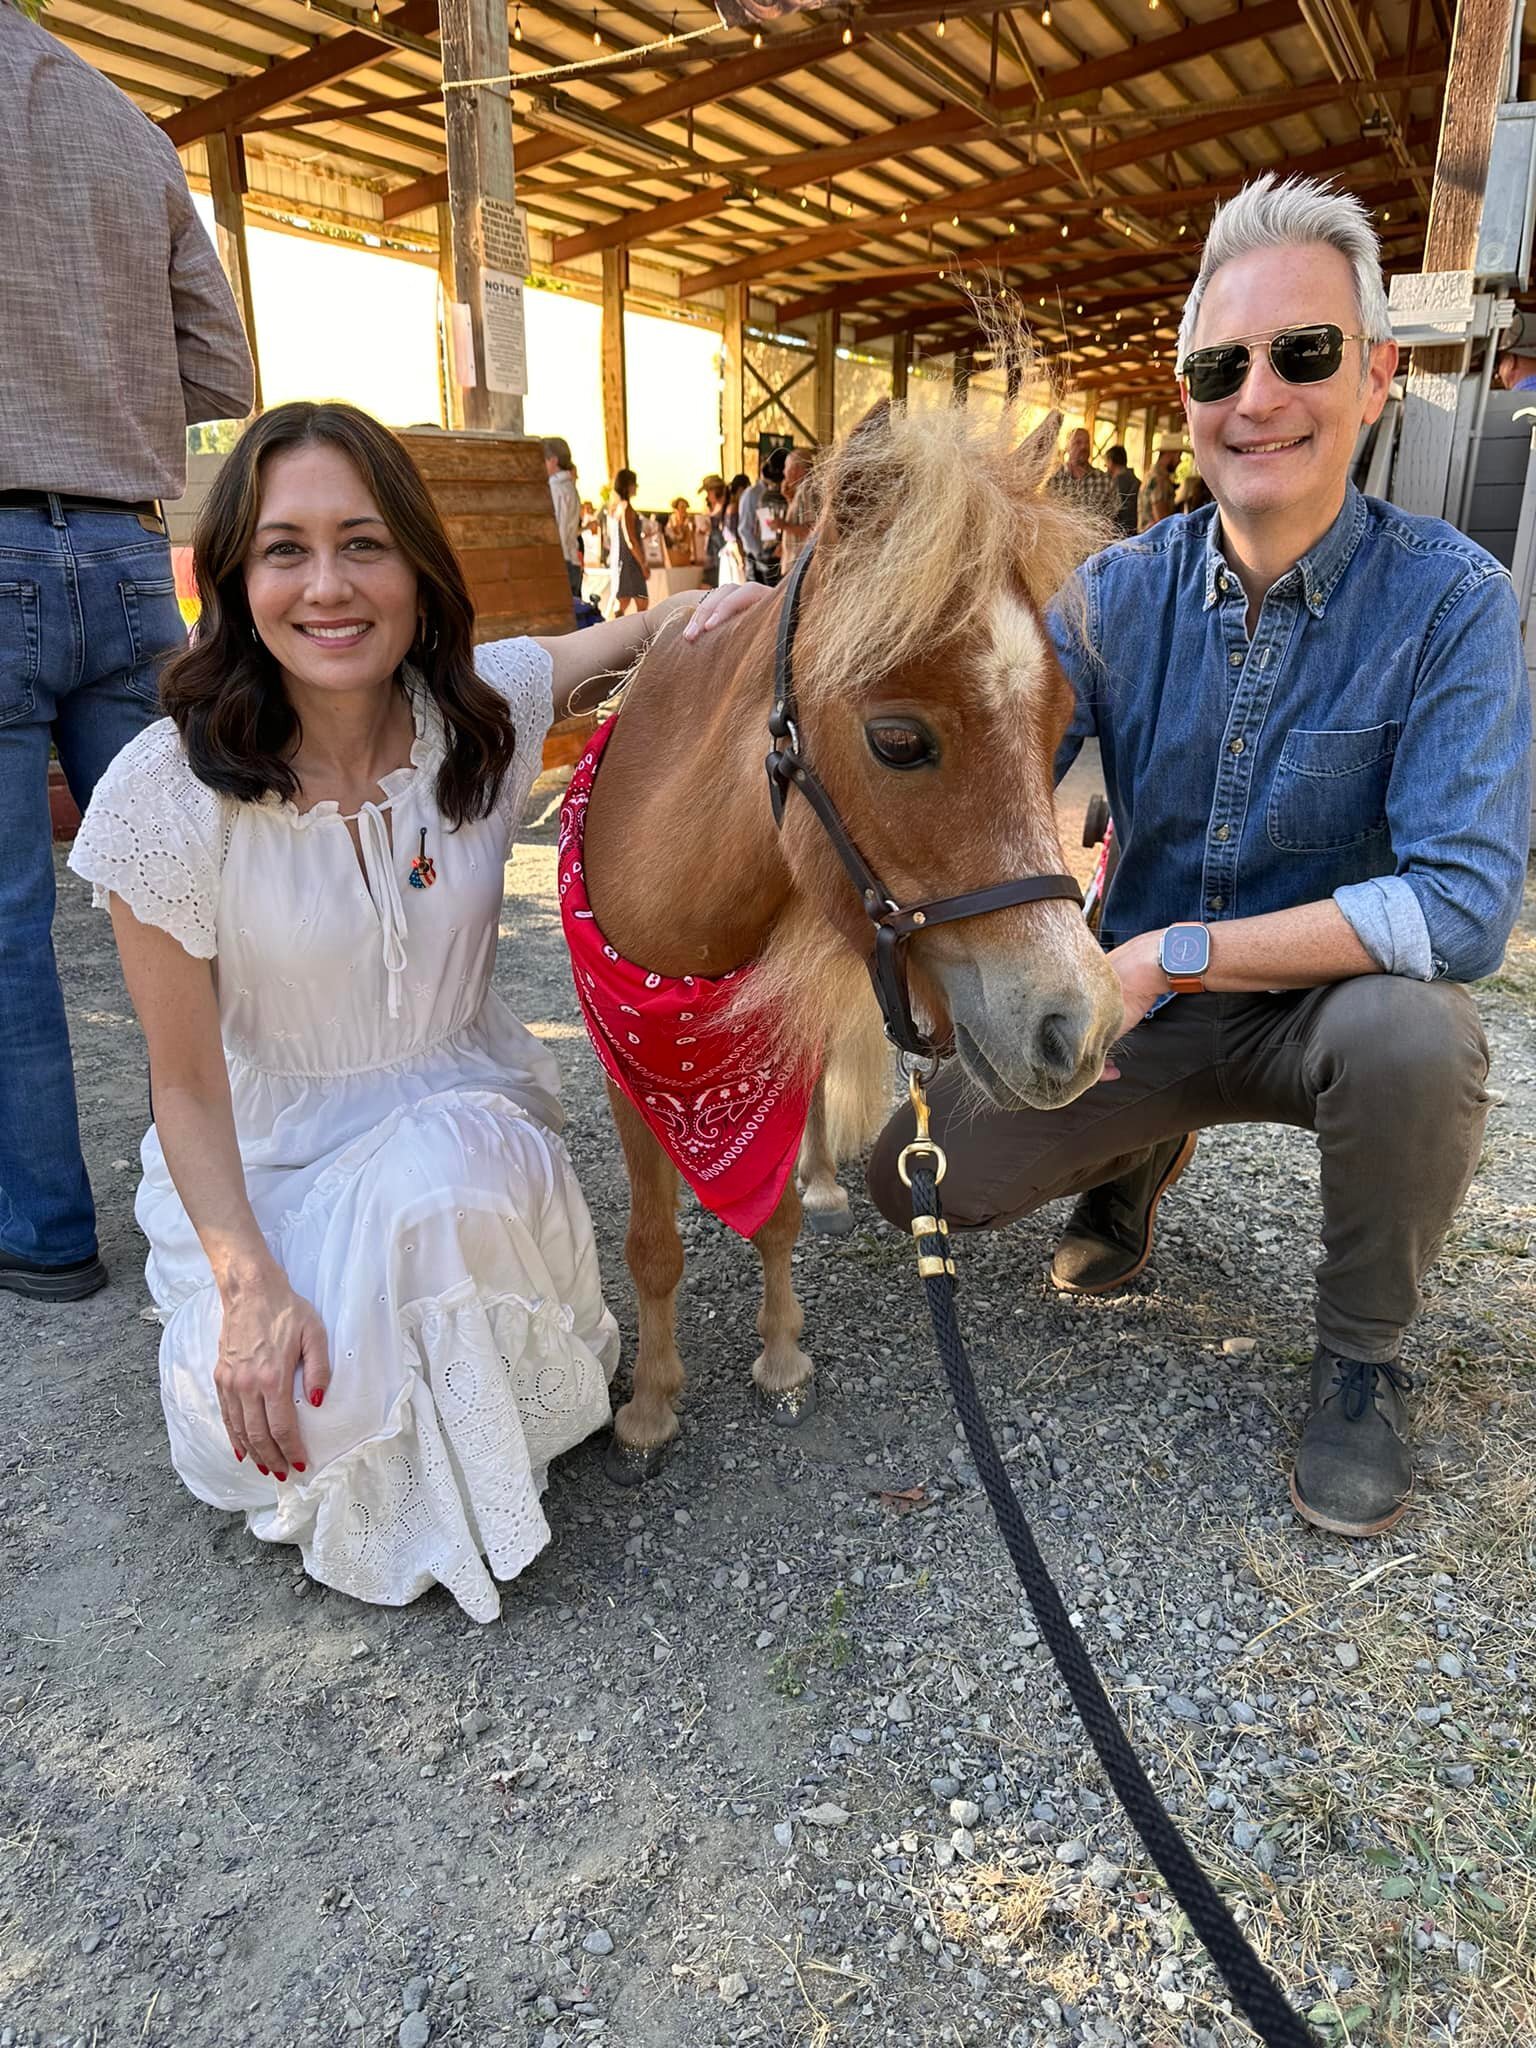 What a magical evening at The Heart of the Horse auction for Save A Forgotten Equine - SAFE. Loved every minute with Paula Brady O'Neil, John O&rsquo;Neil, Dan and Pam Brady and  Ashley Roy Farrington. 🐴❤️🌻